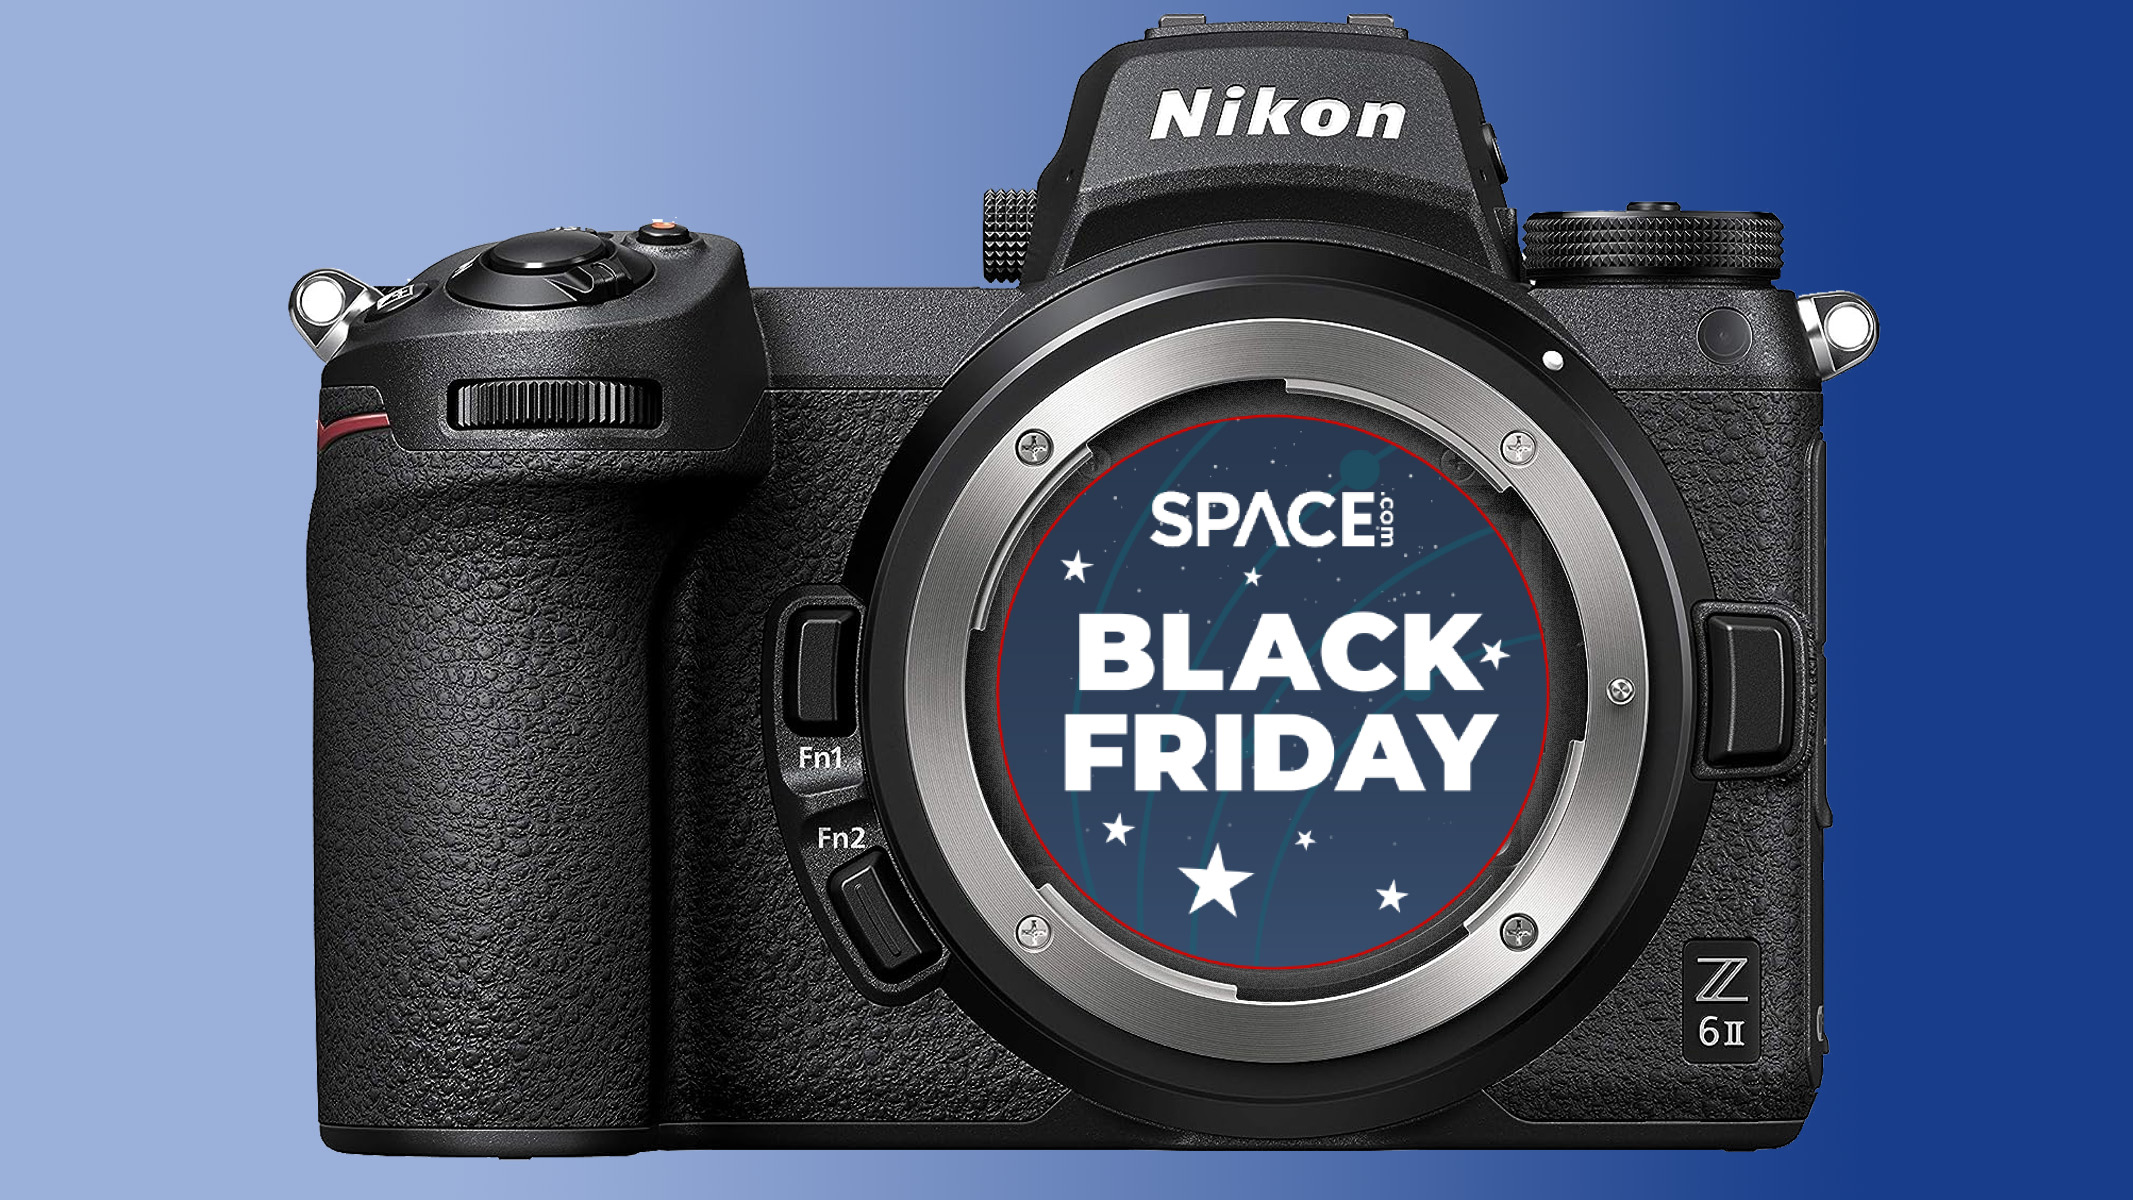 Save 20% on the excellent Nikon Z6 II full-frame mirrorless camera this Cyber Monday Space